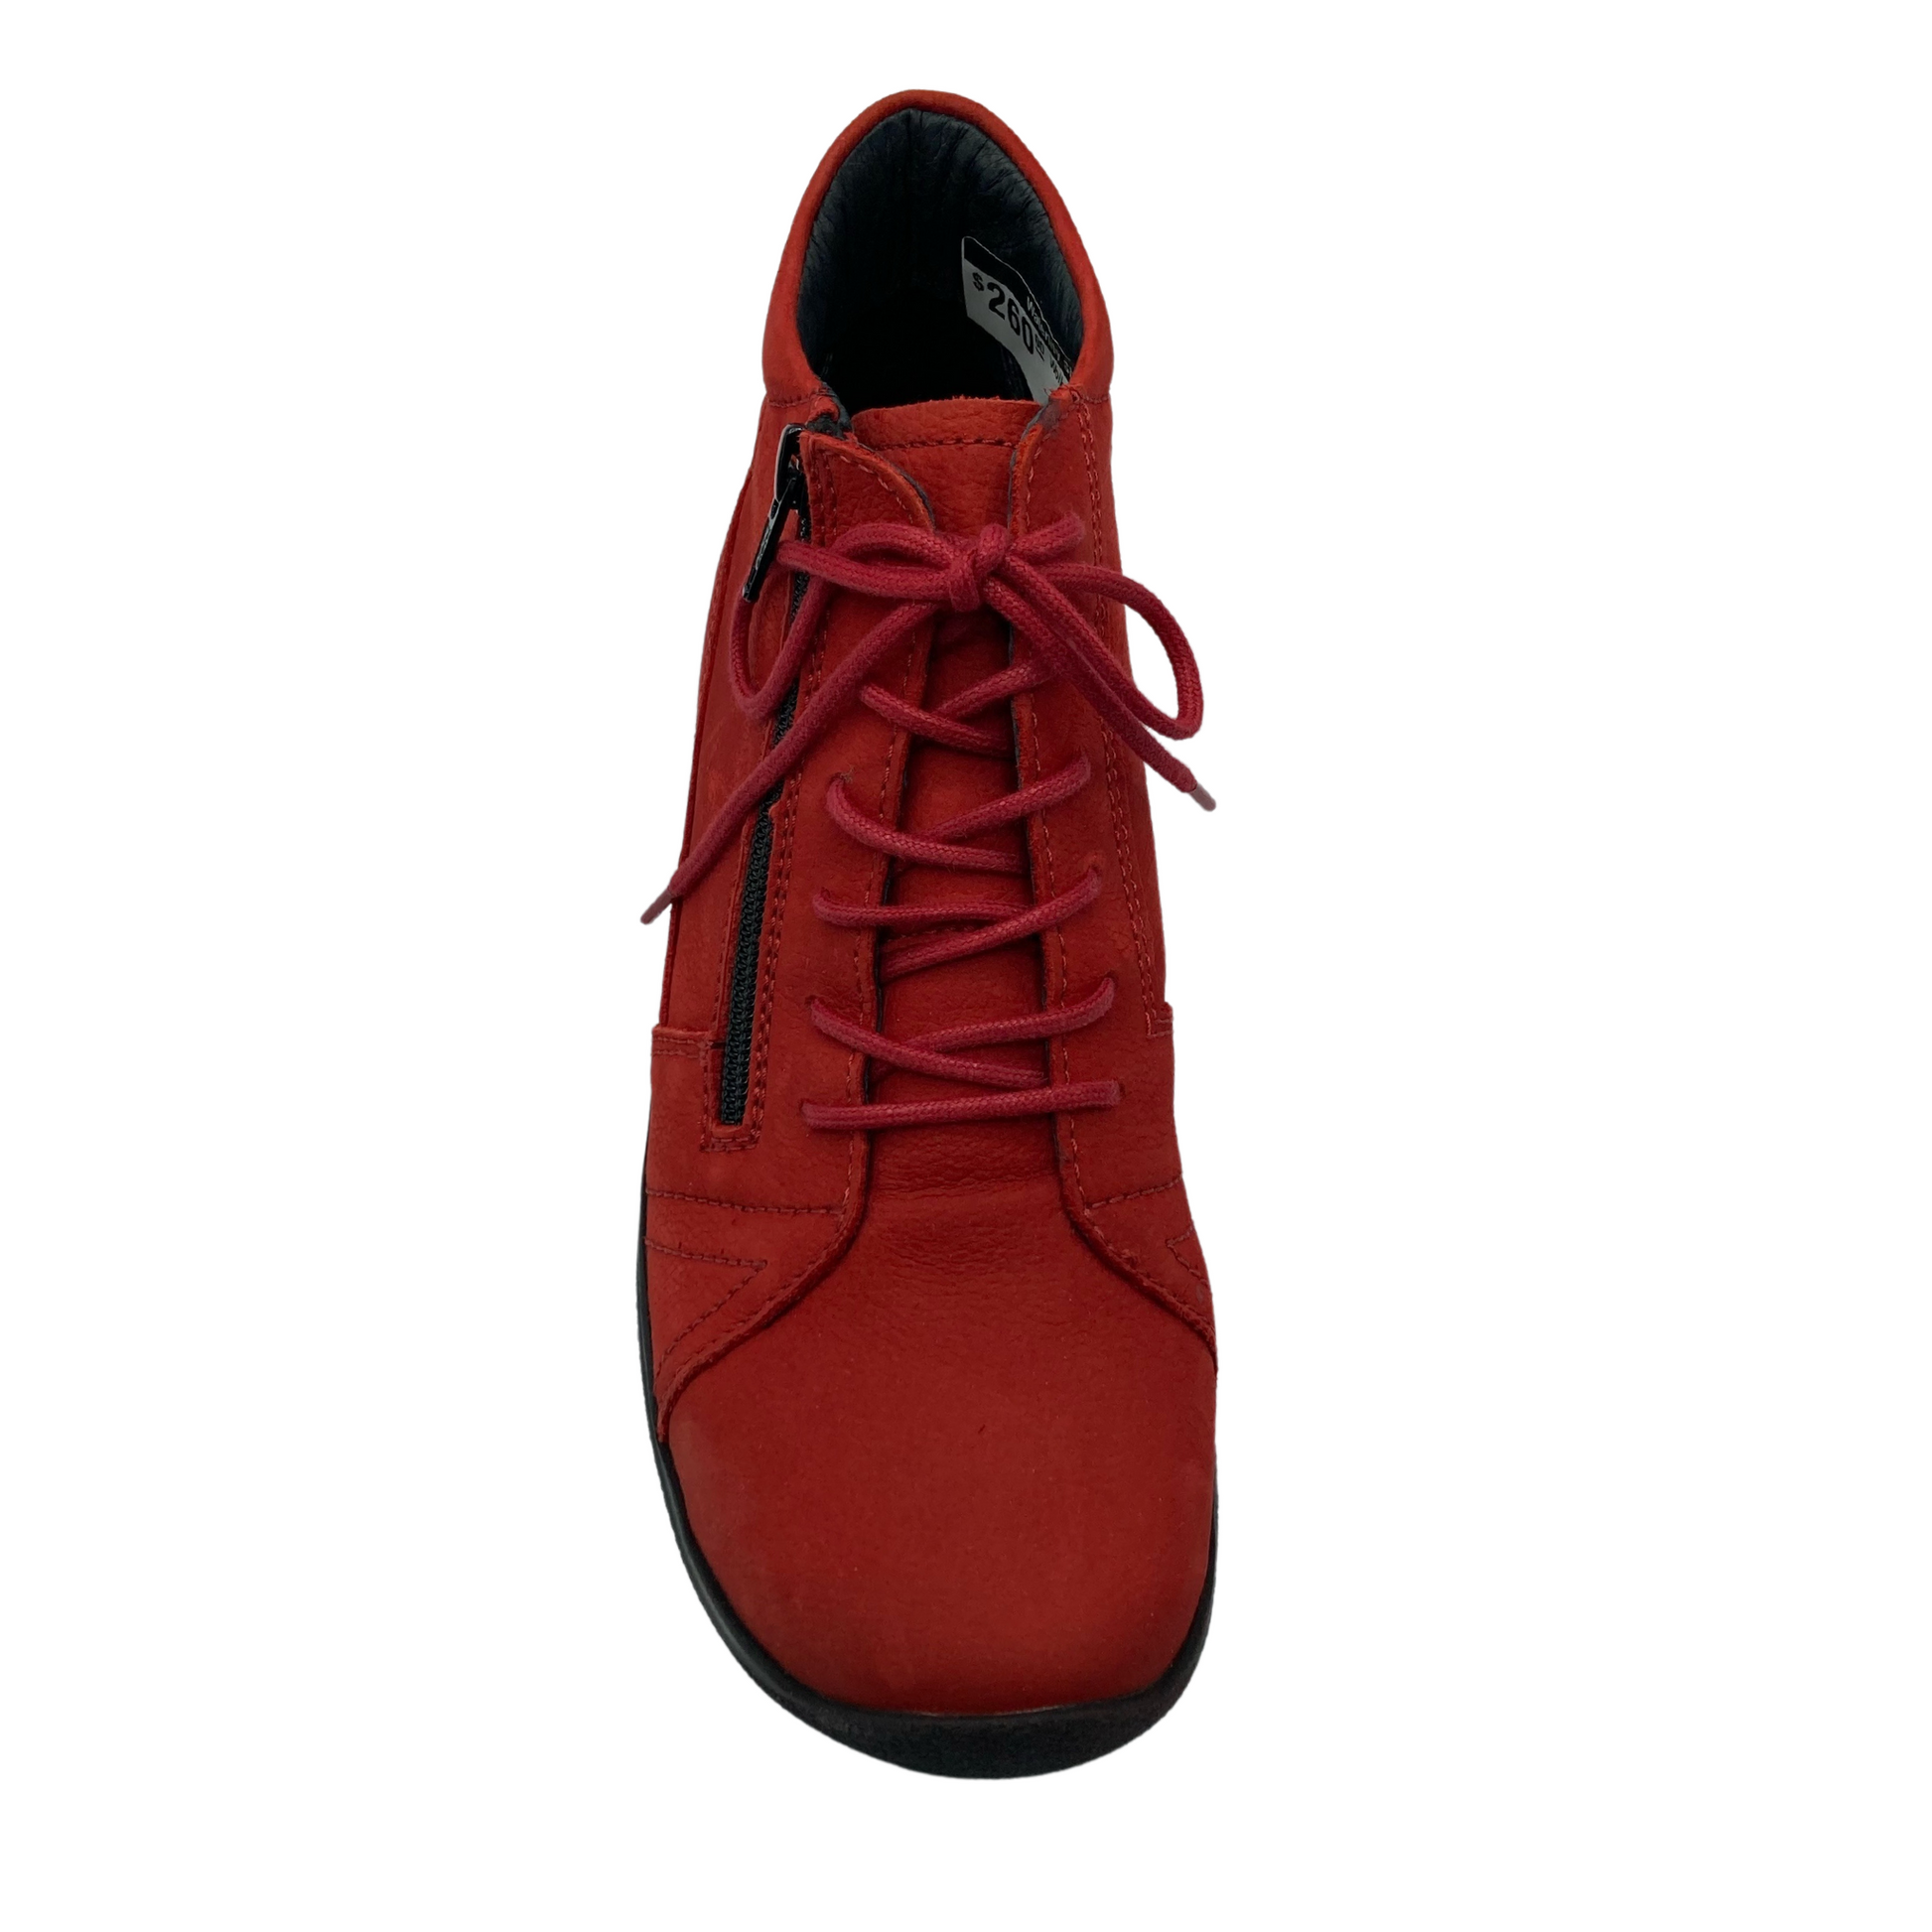 Top view of red leather walking shoe with red laces and side zipper closure